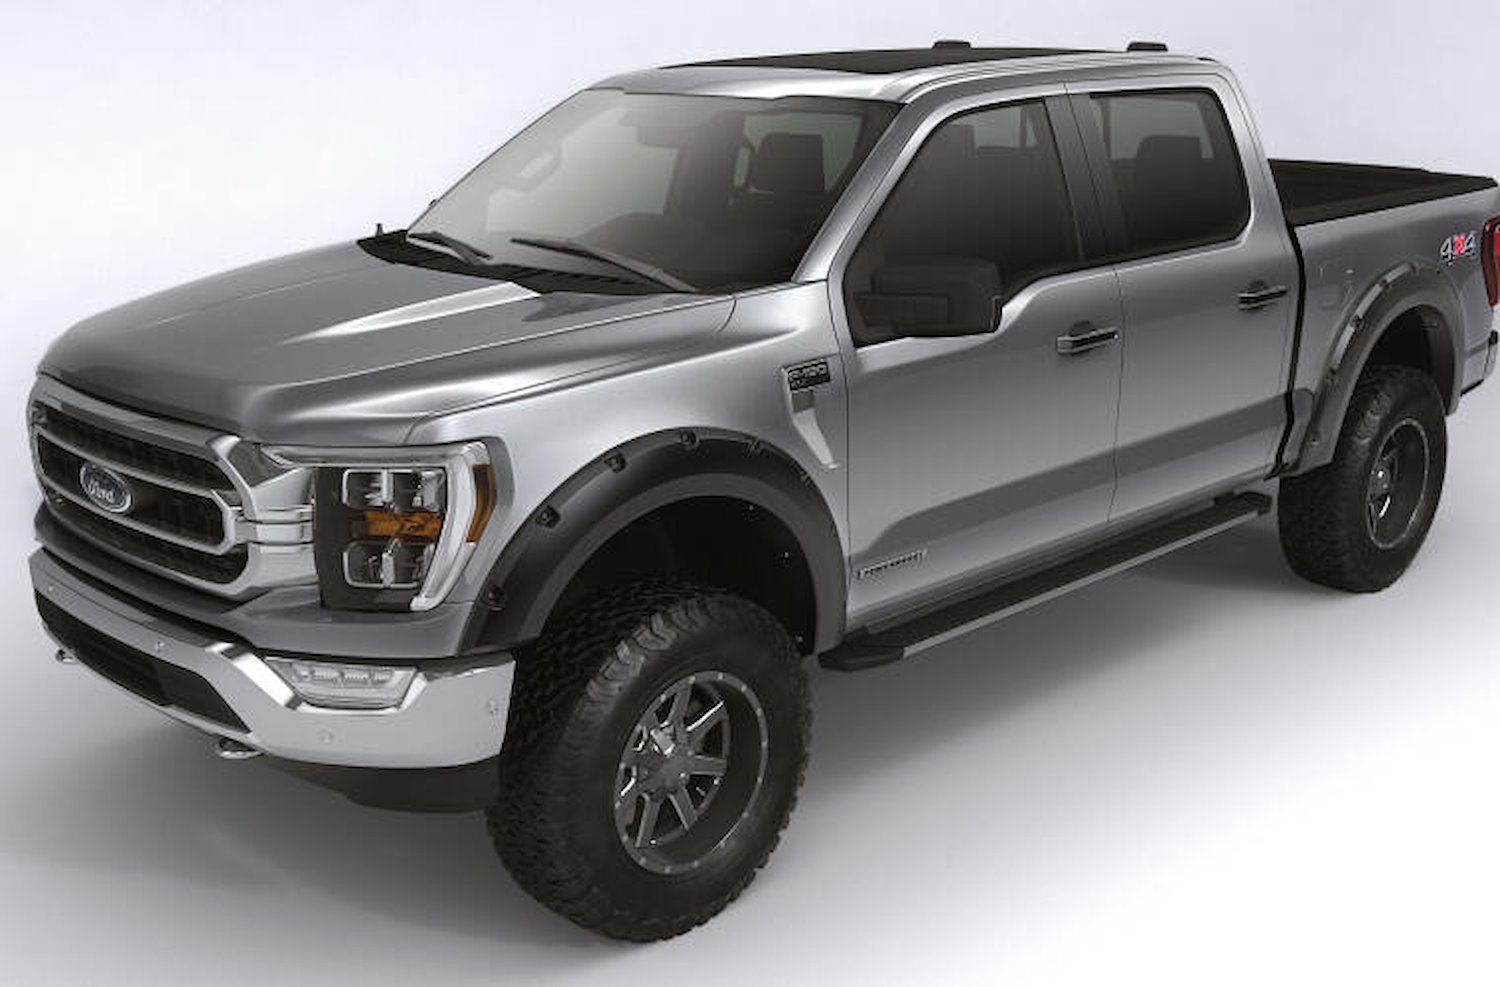 Forge Front/Rear Fender Flares for 2008-2010 Ford F-250,